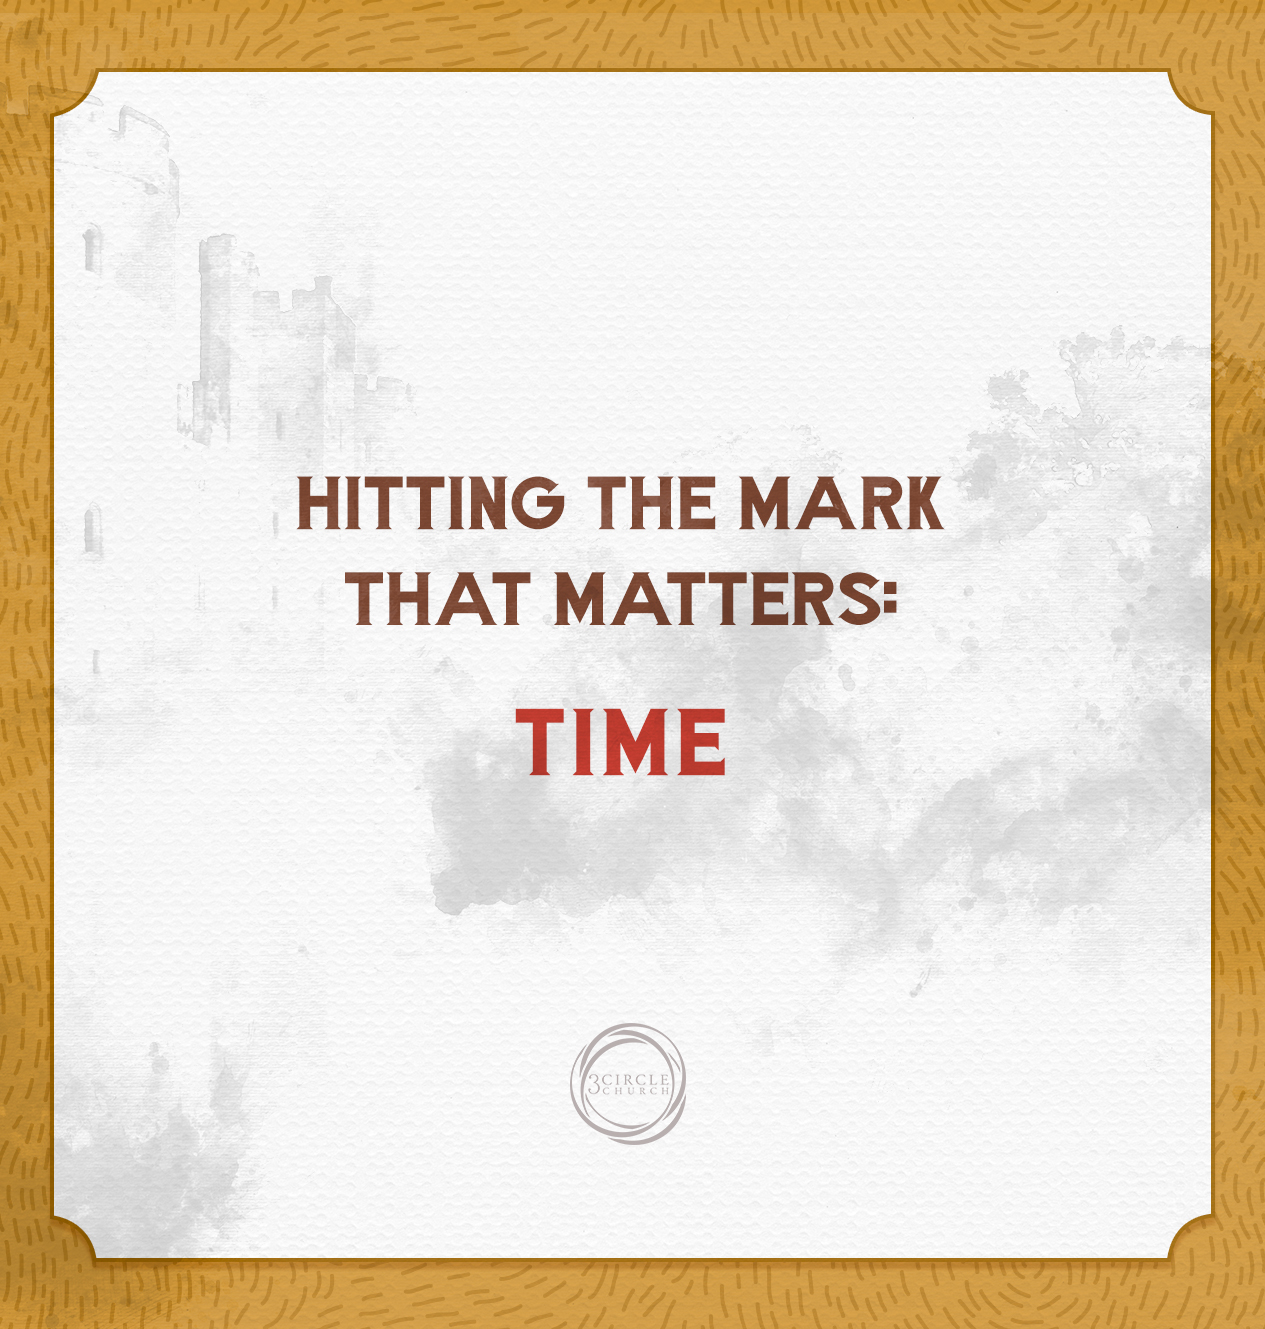 Hitting the Mark that Matters: Time